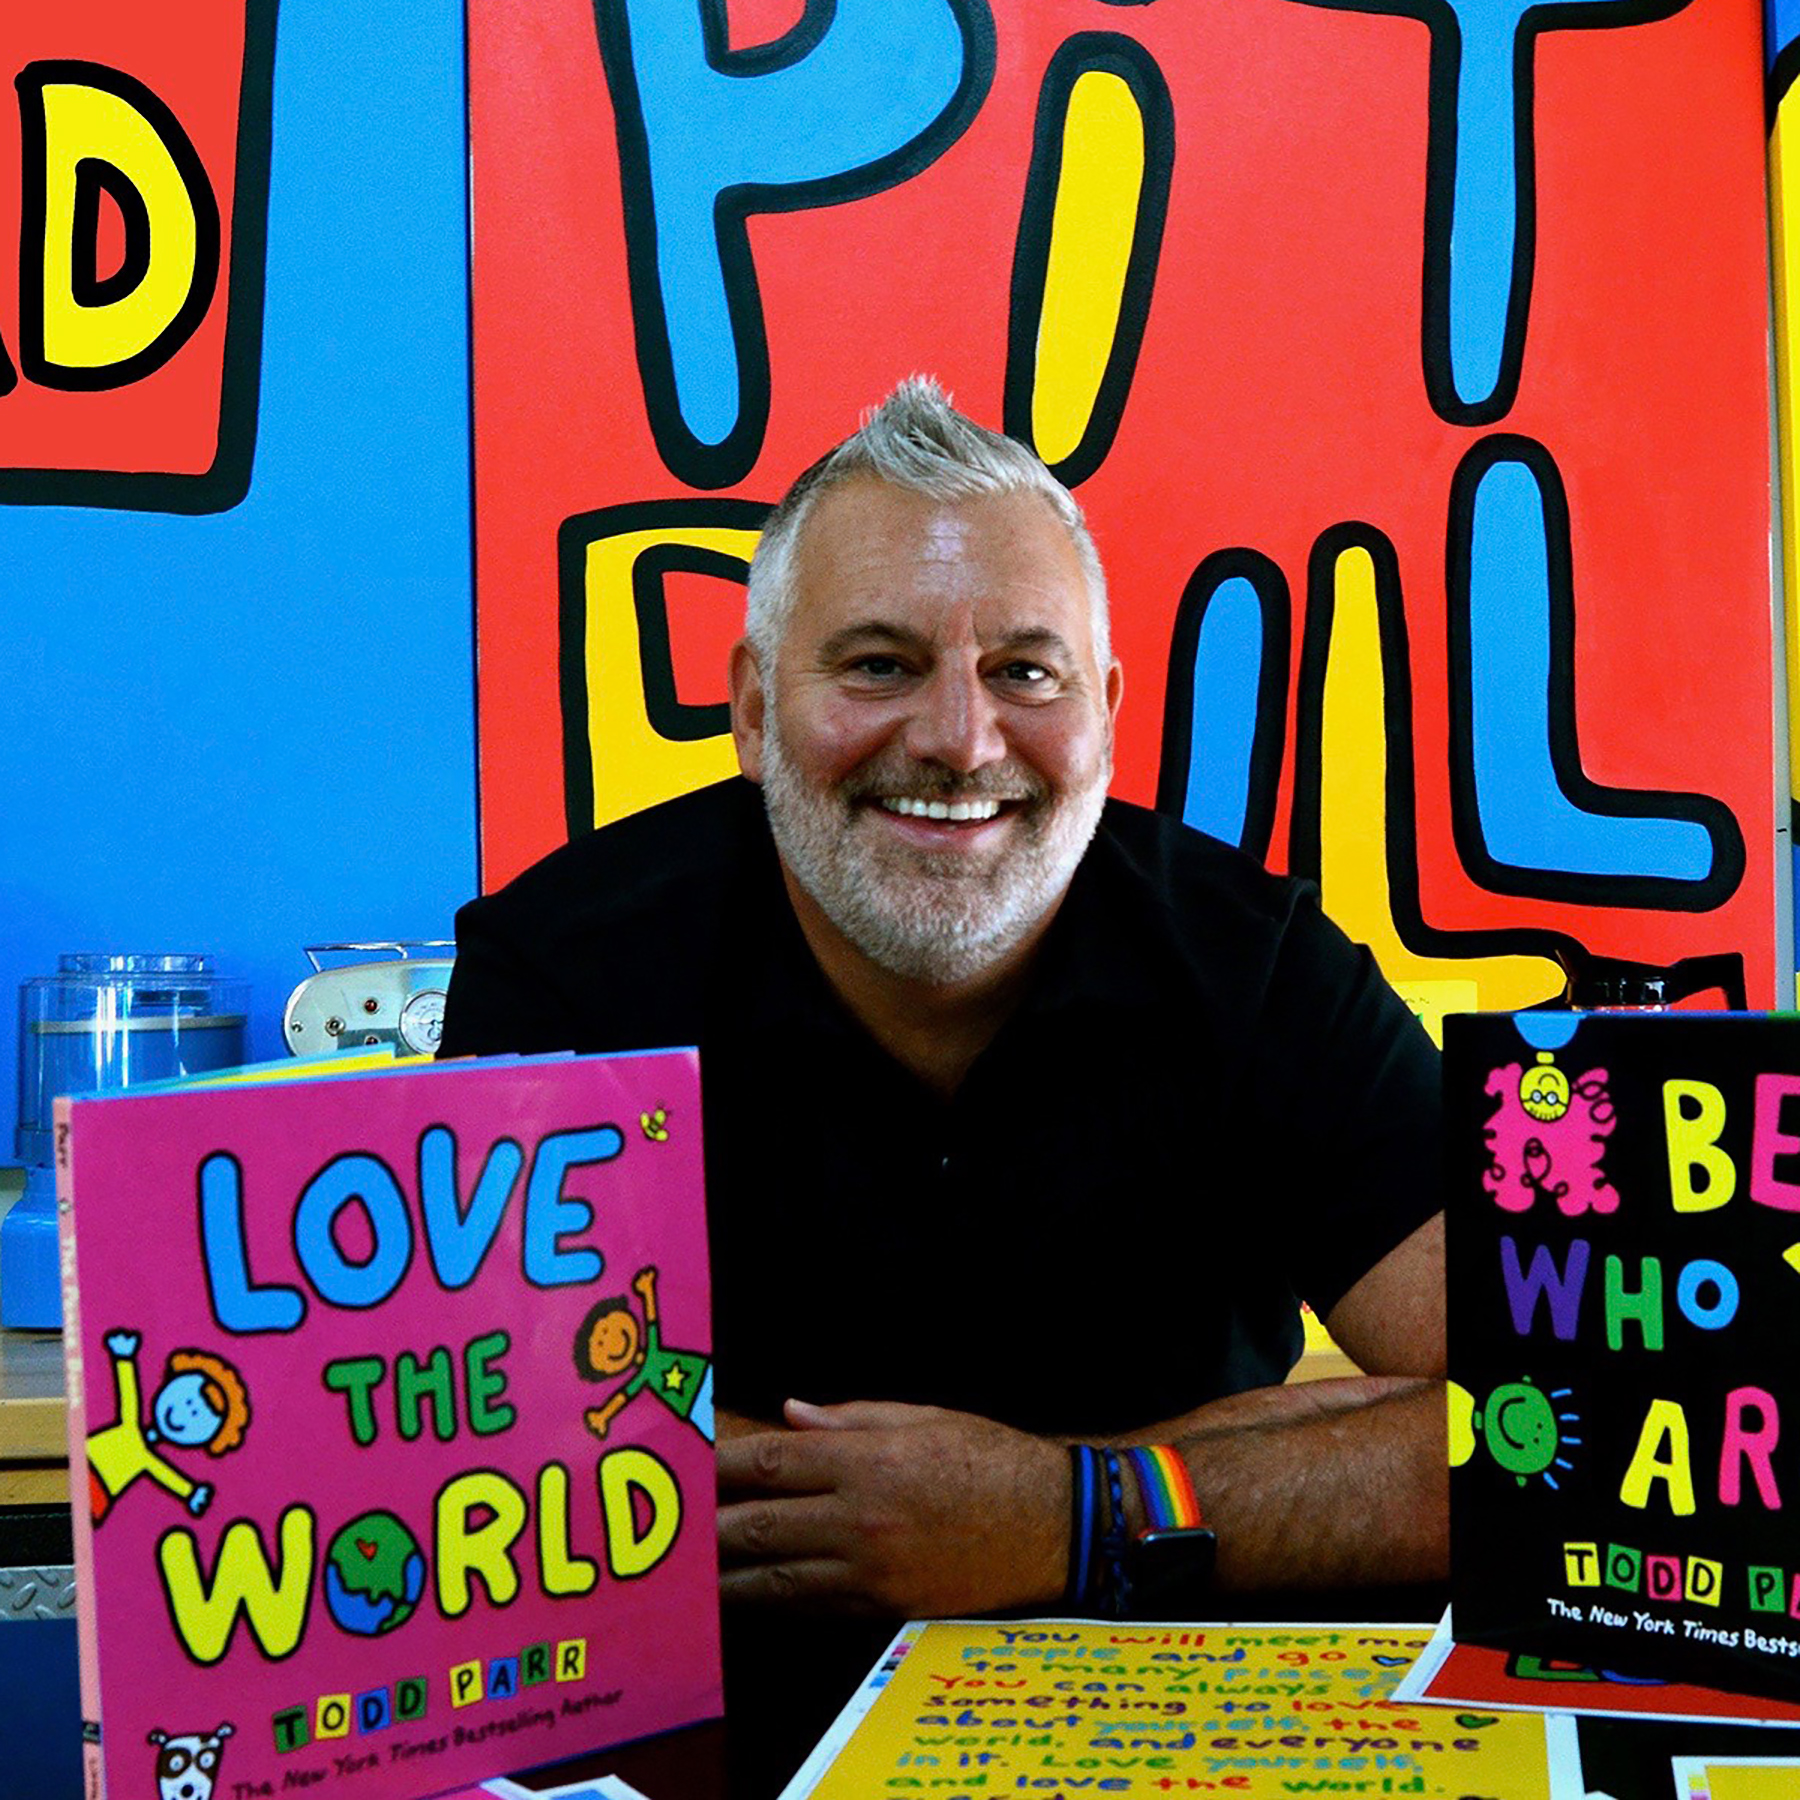 Image of Todd Parr sitting at a table with his books "Love the World" and "Be Who You Are"